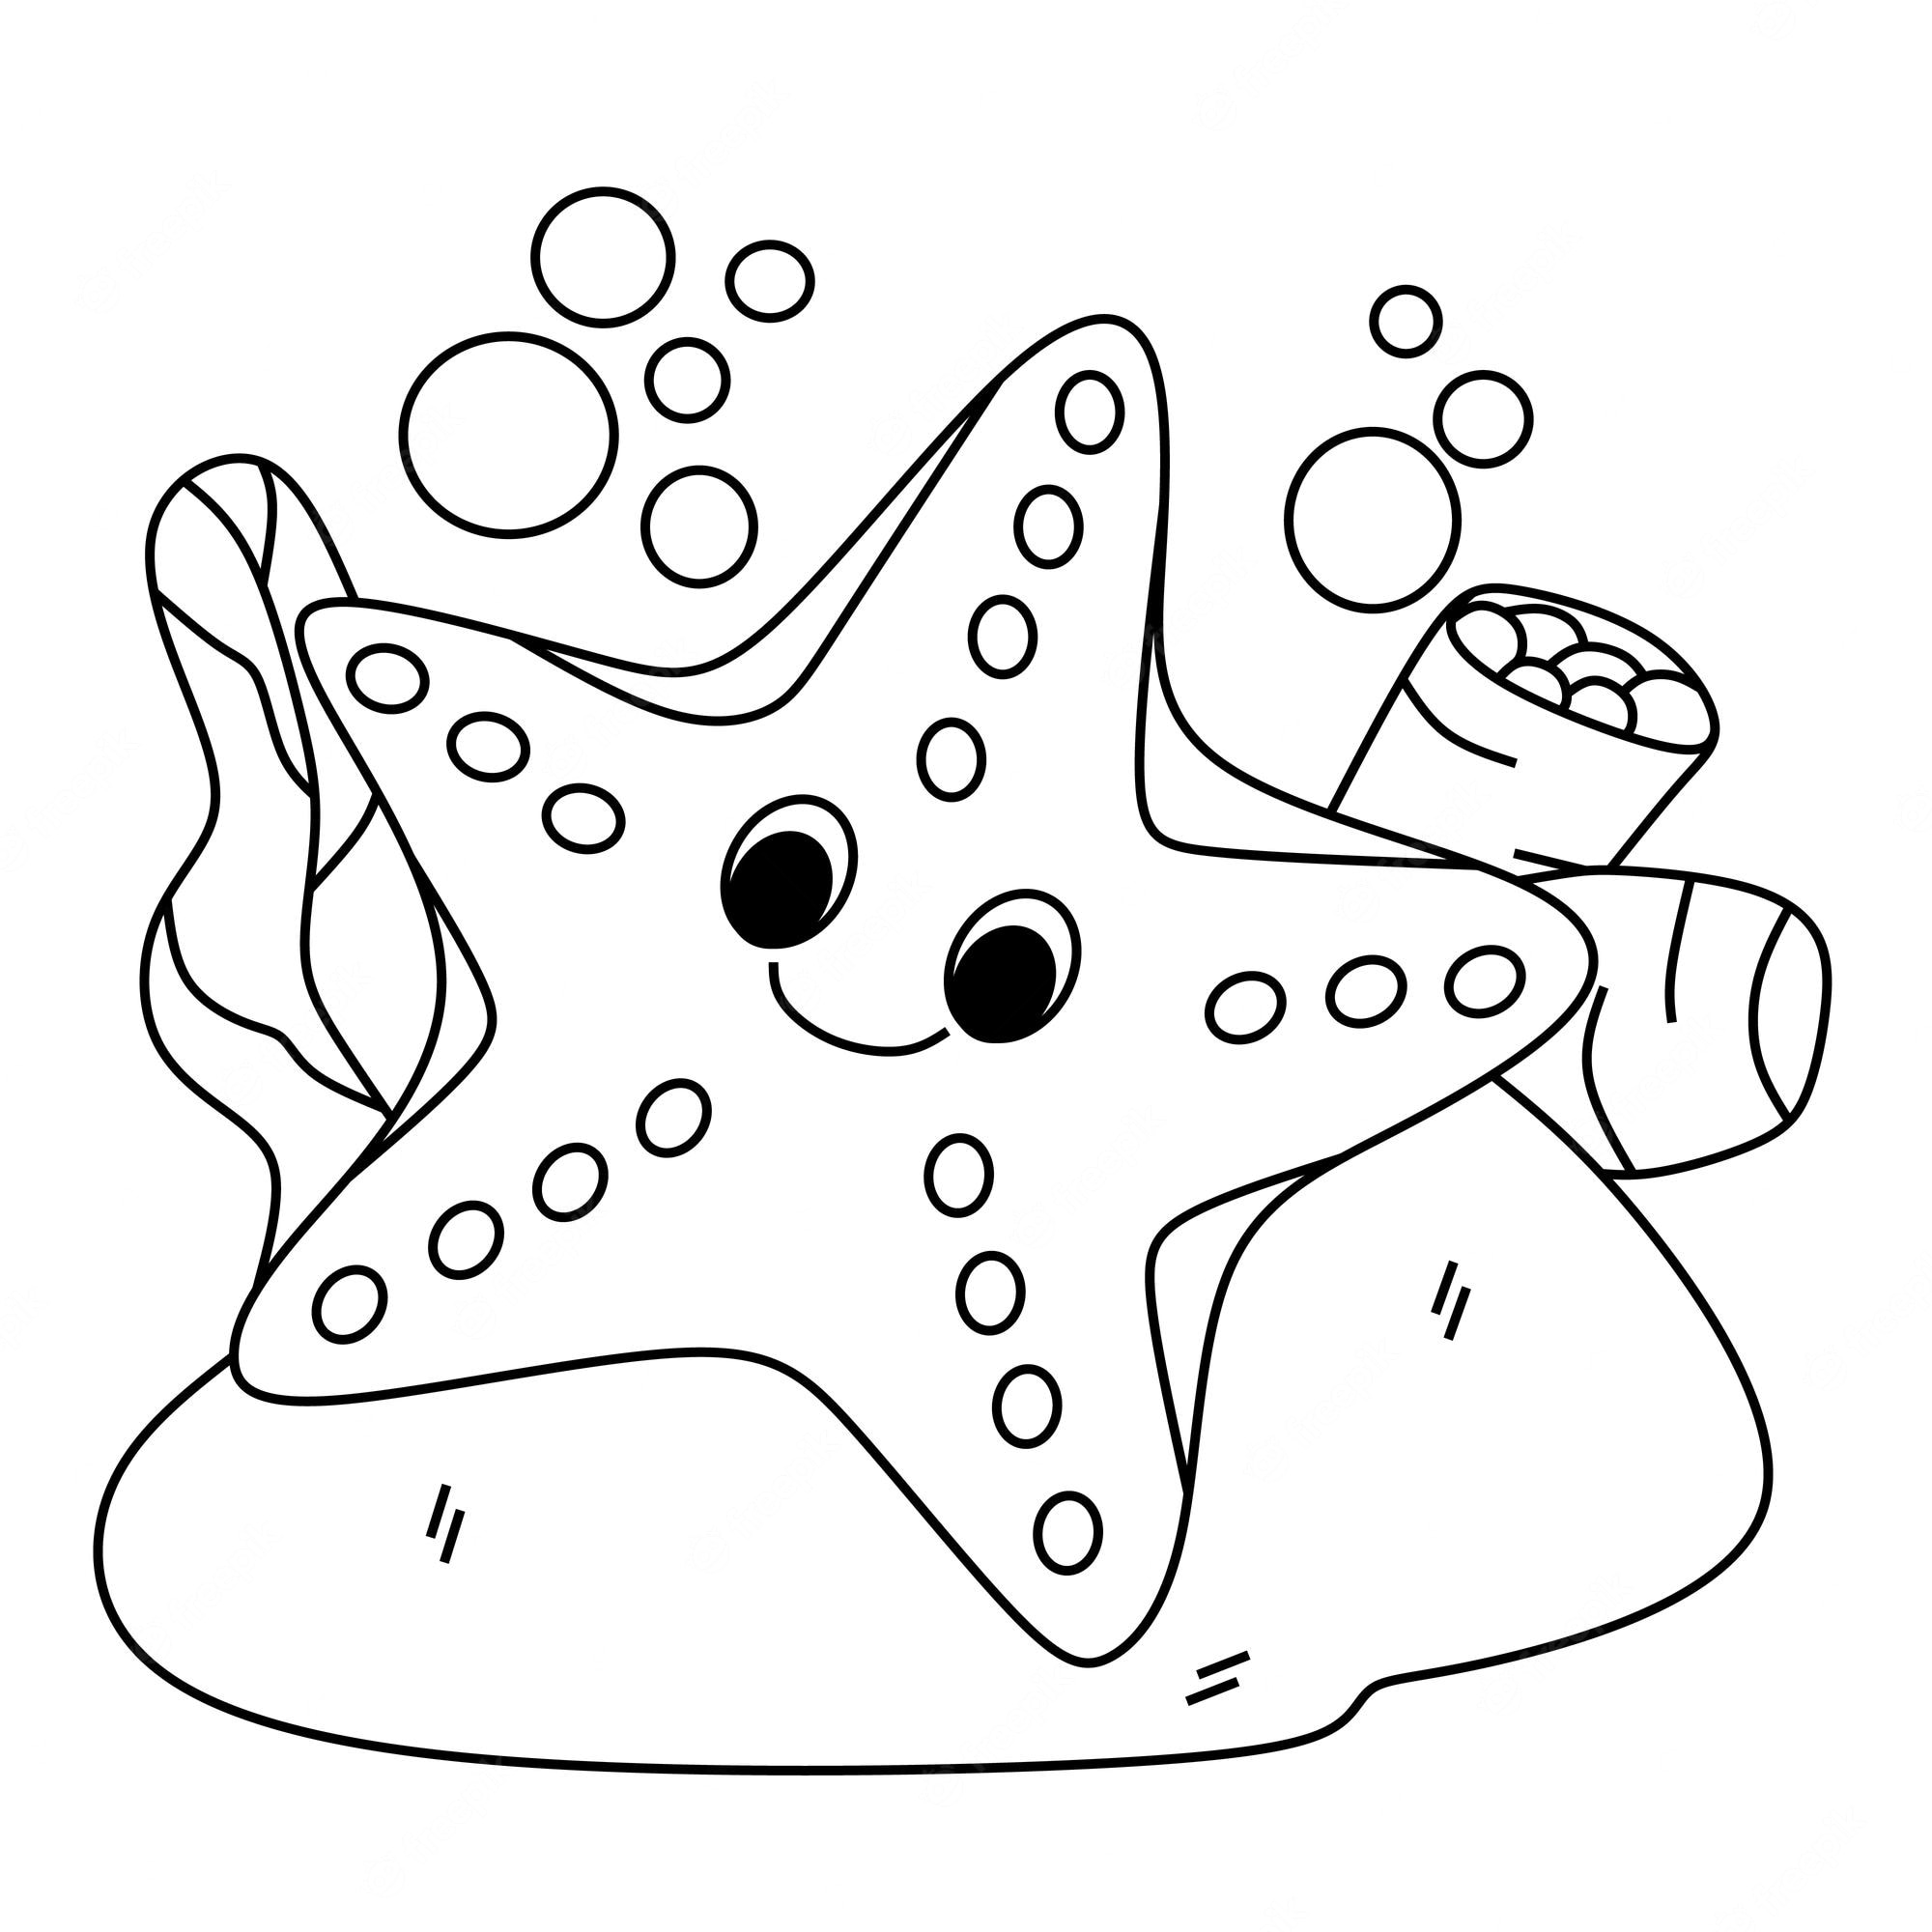 Starfish Colouring Pages